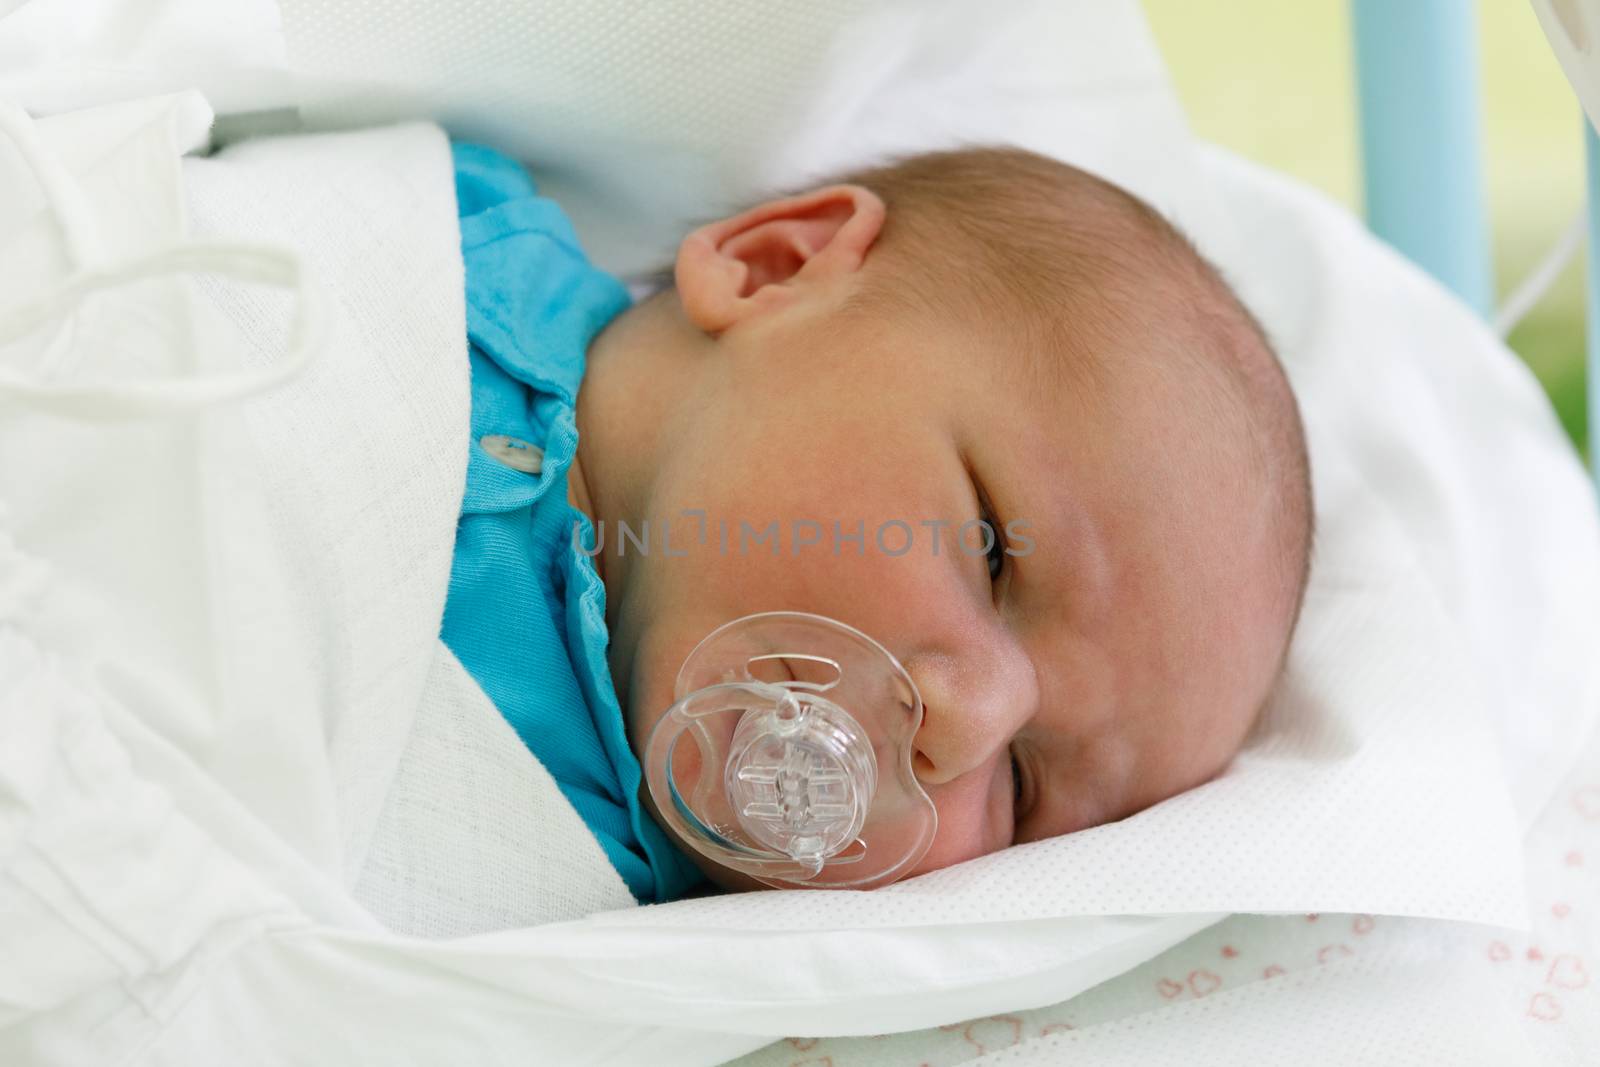 Newborn baby infant in the hospital by artush